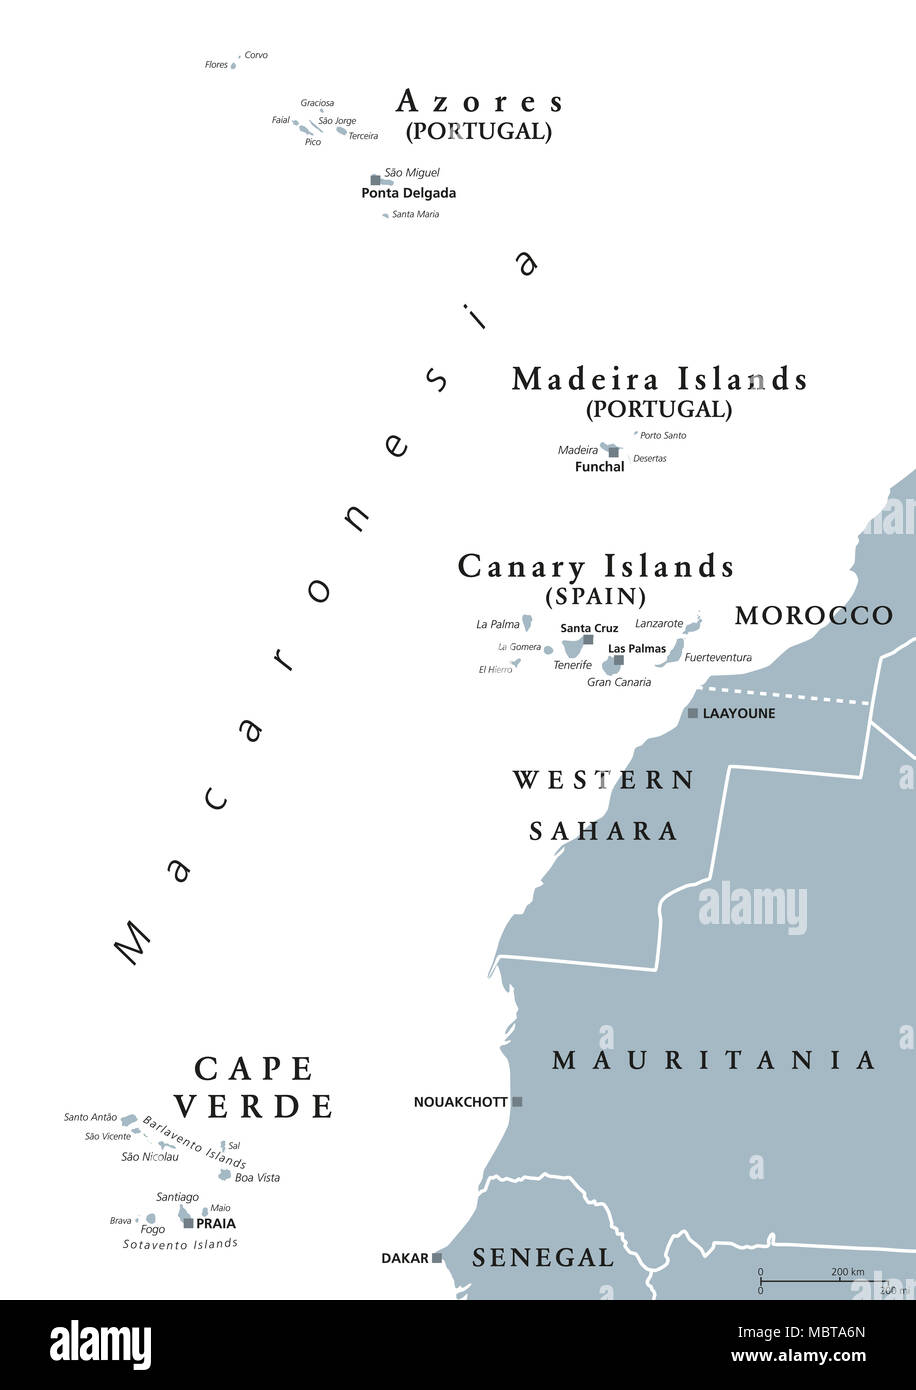 Macaronesia political map. Azores, Cape Verde, Madeira, Canary Islands. Collection of archipelagos in the Atlantic Ocean off the coast of Africa. Stock Photo